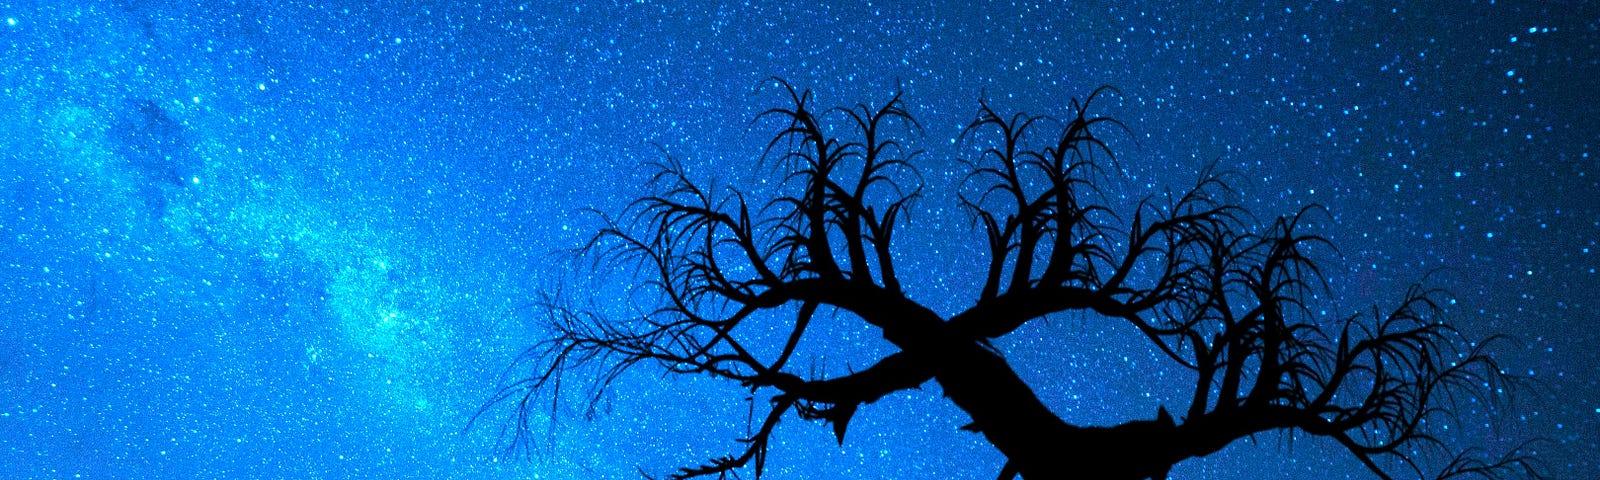 Silhouette of person beside a bare tree beneath a starry sky